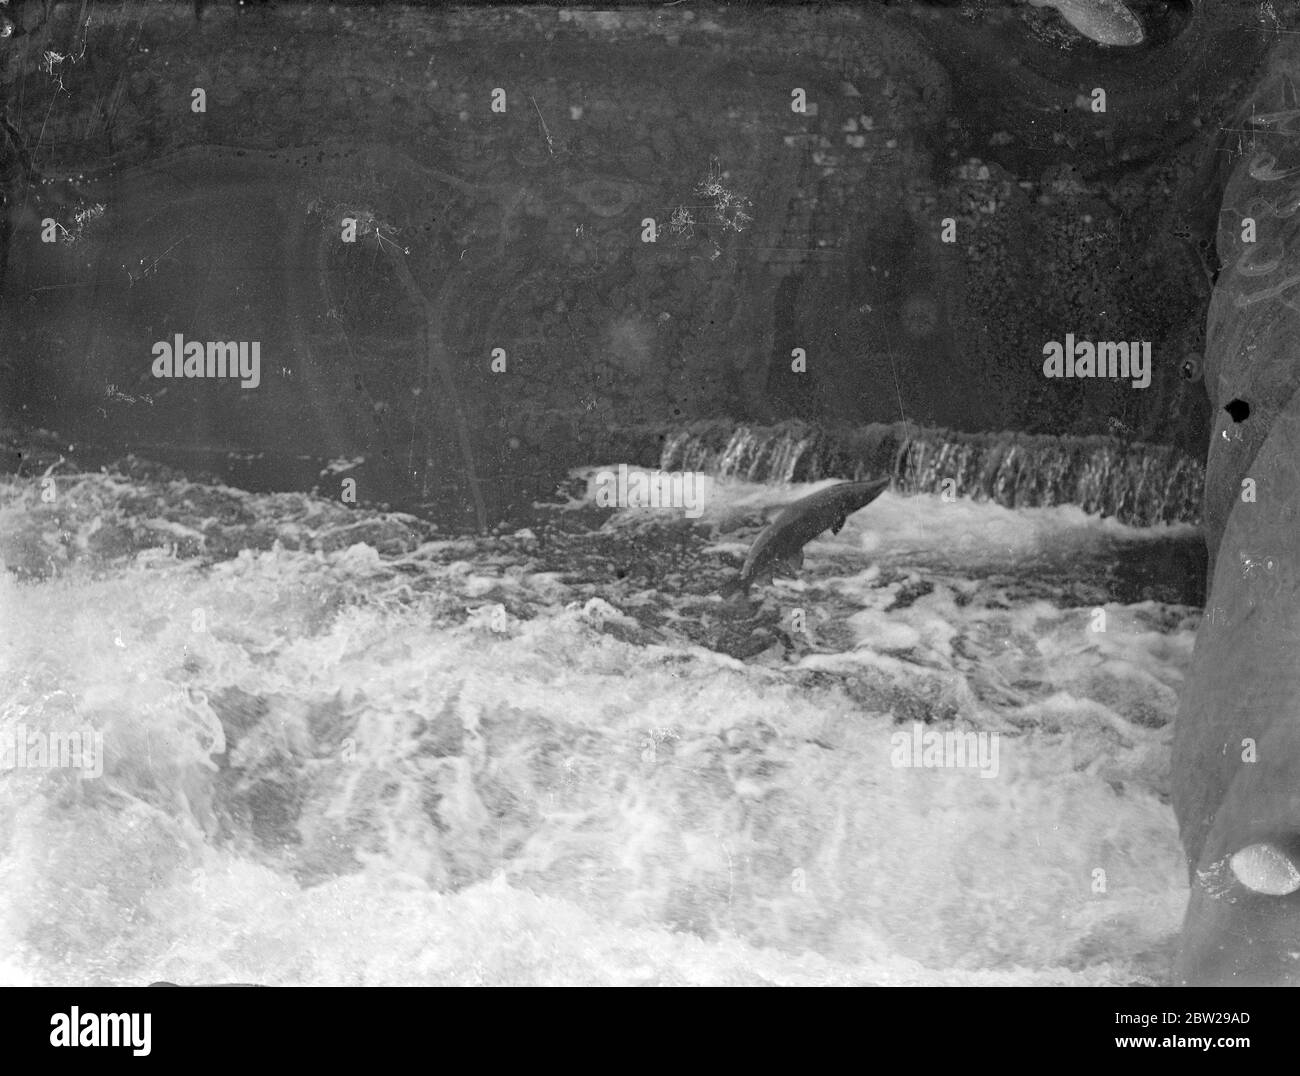 Leaping salmon in Hampshire River on way to breeding grounds. A salmon caught by the camera as it leaked through the foaming waters to clear a weir near Romsey, Hampshire, during the annual migration up the River Test to the breeding grounds. The brickwork at the weir has been specially padded with sacking to prevent injury to the hundreds of fish which held themselves over the obstacle. 4 November 1937 Stock Photo